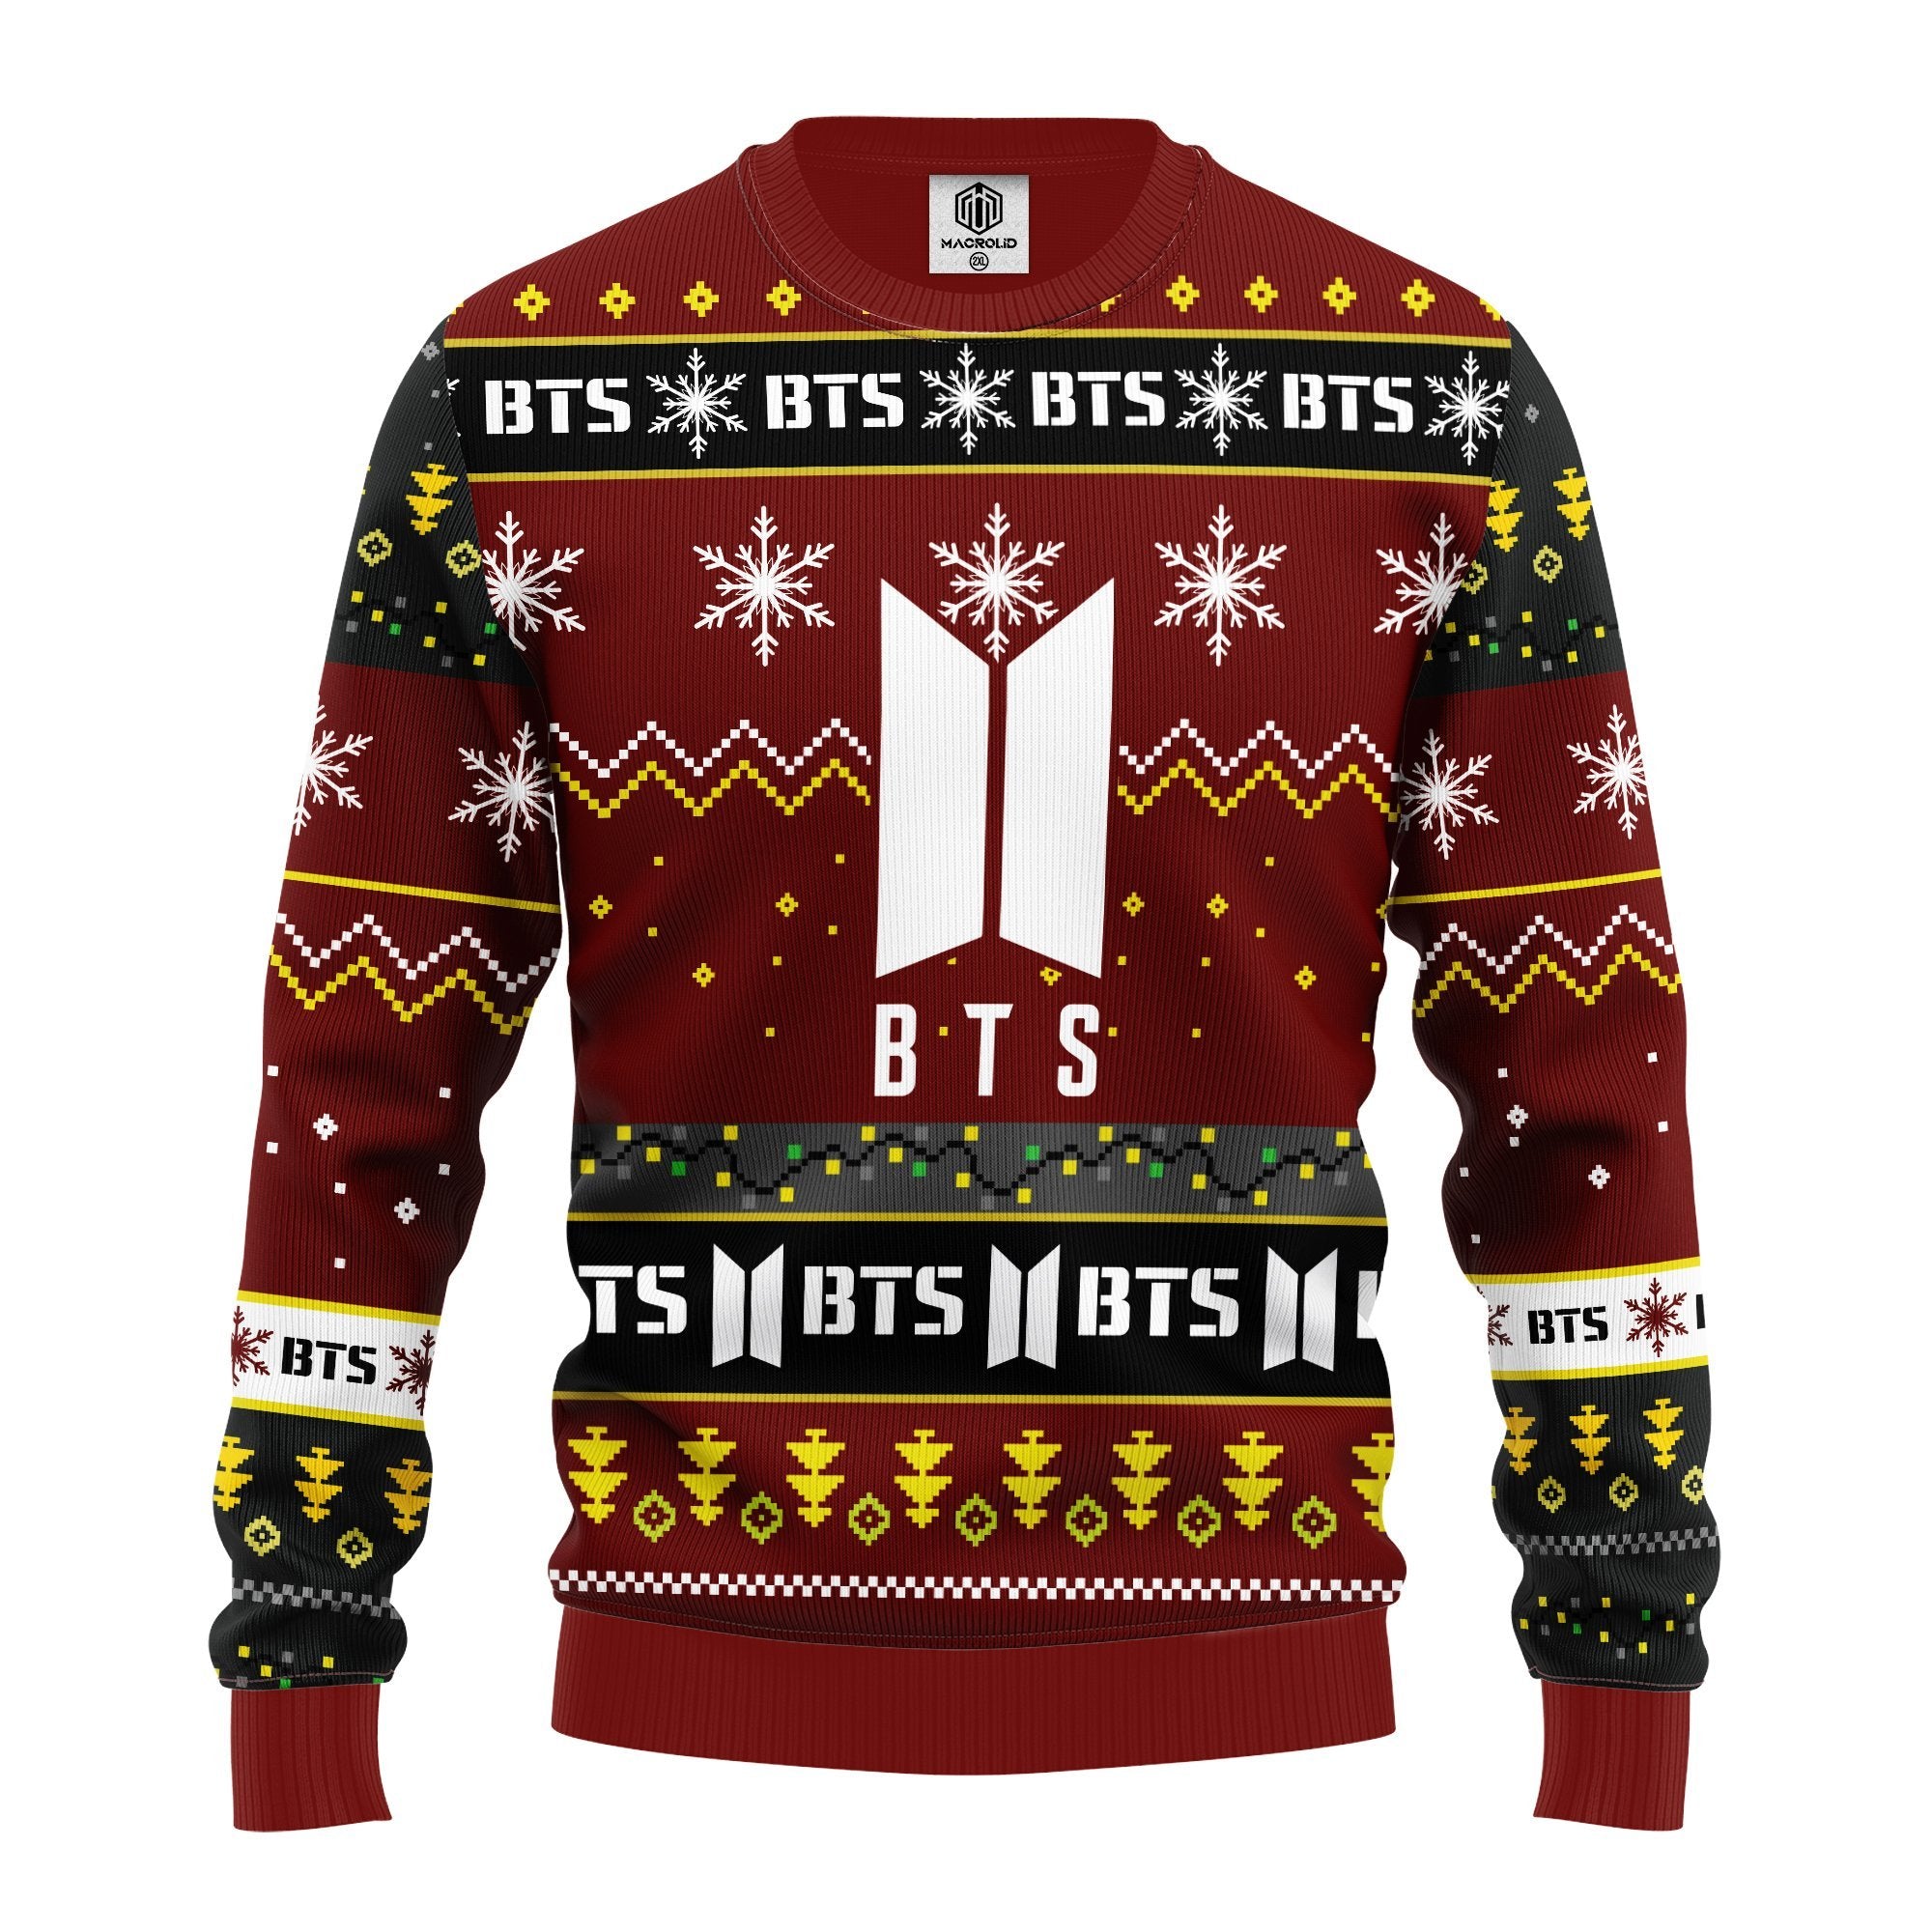 Bts Ugly Christmas Sweater Red Brown 1 Amazing Gift Idea Thanksgiving Gift